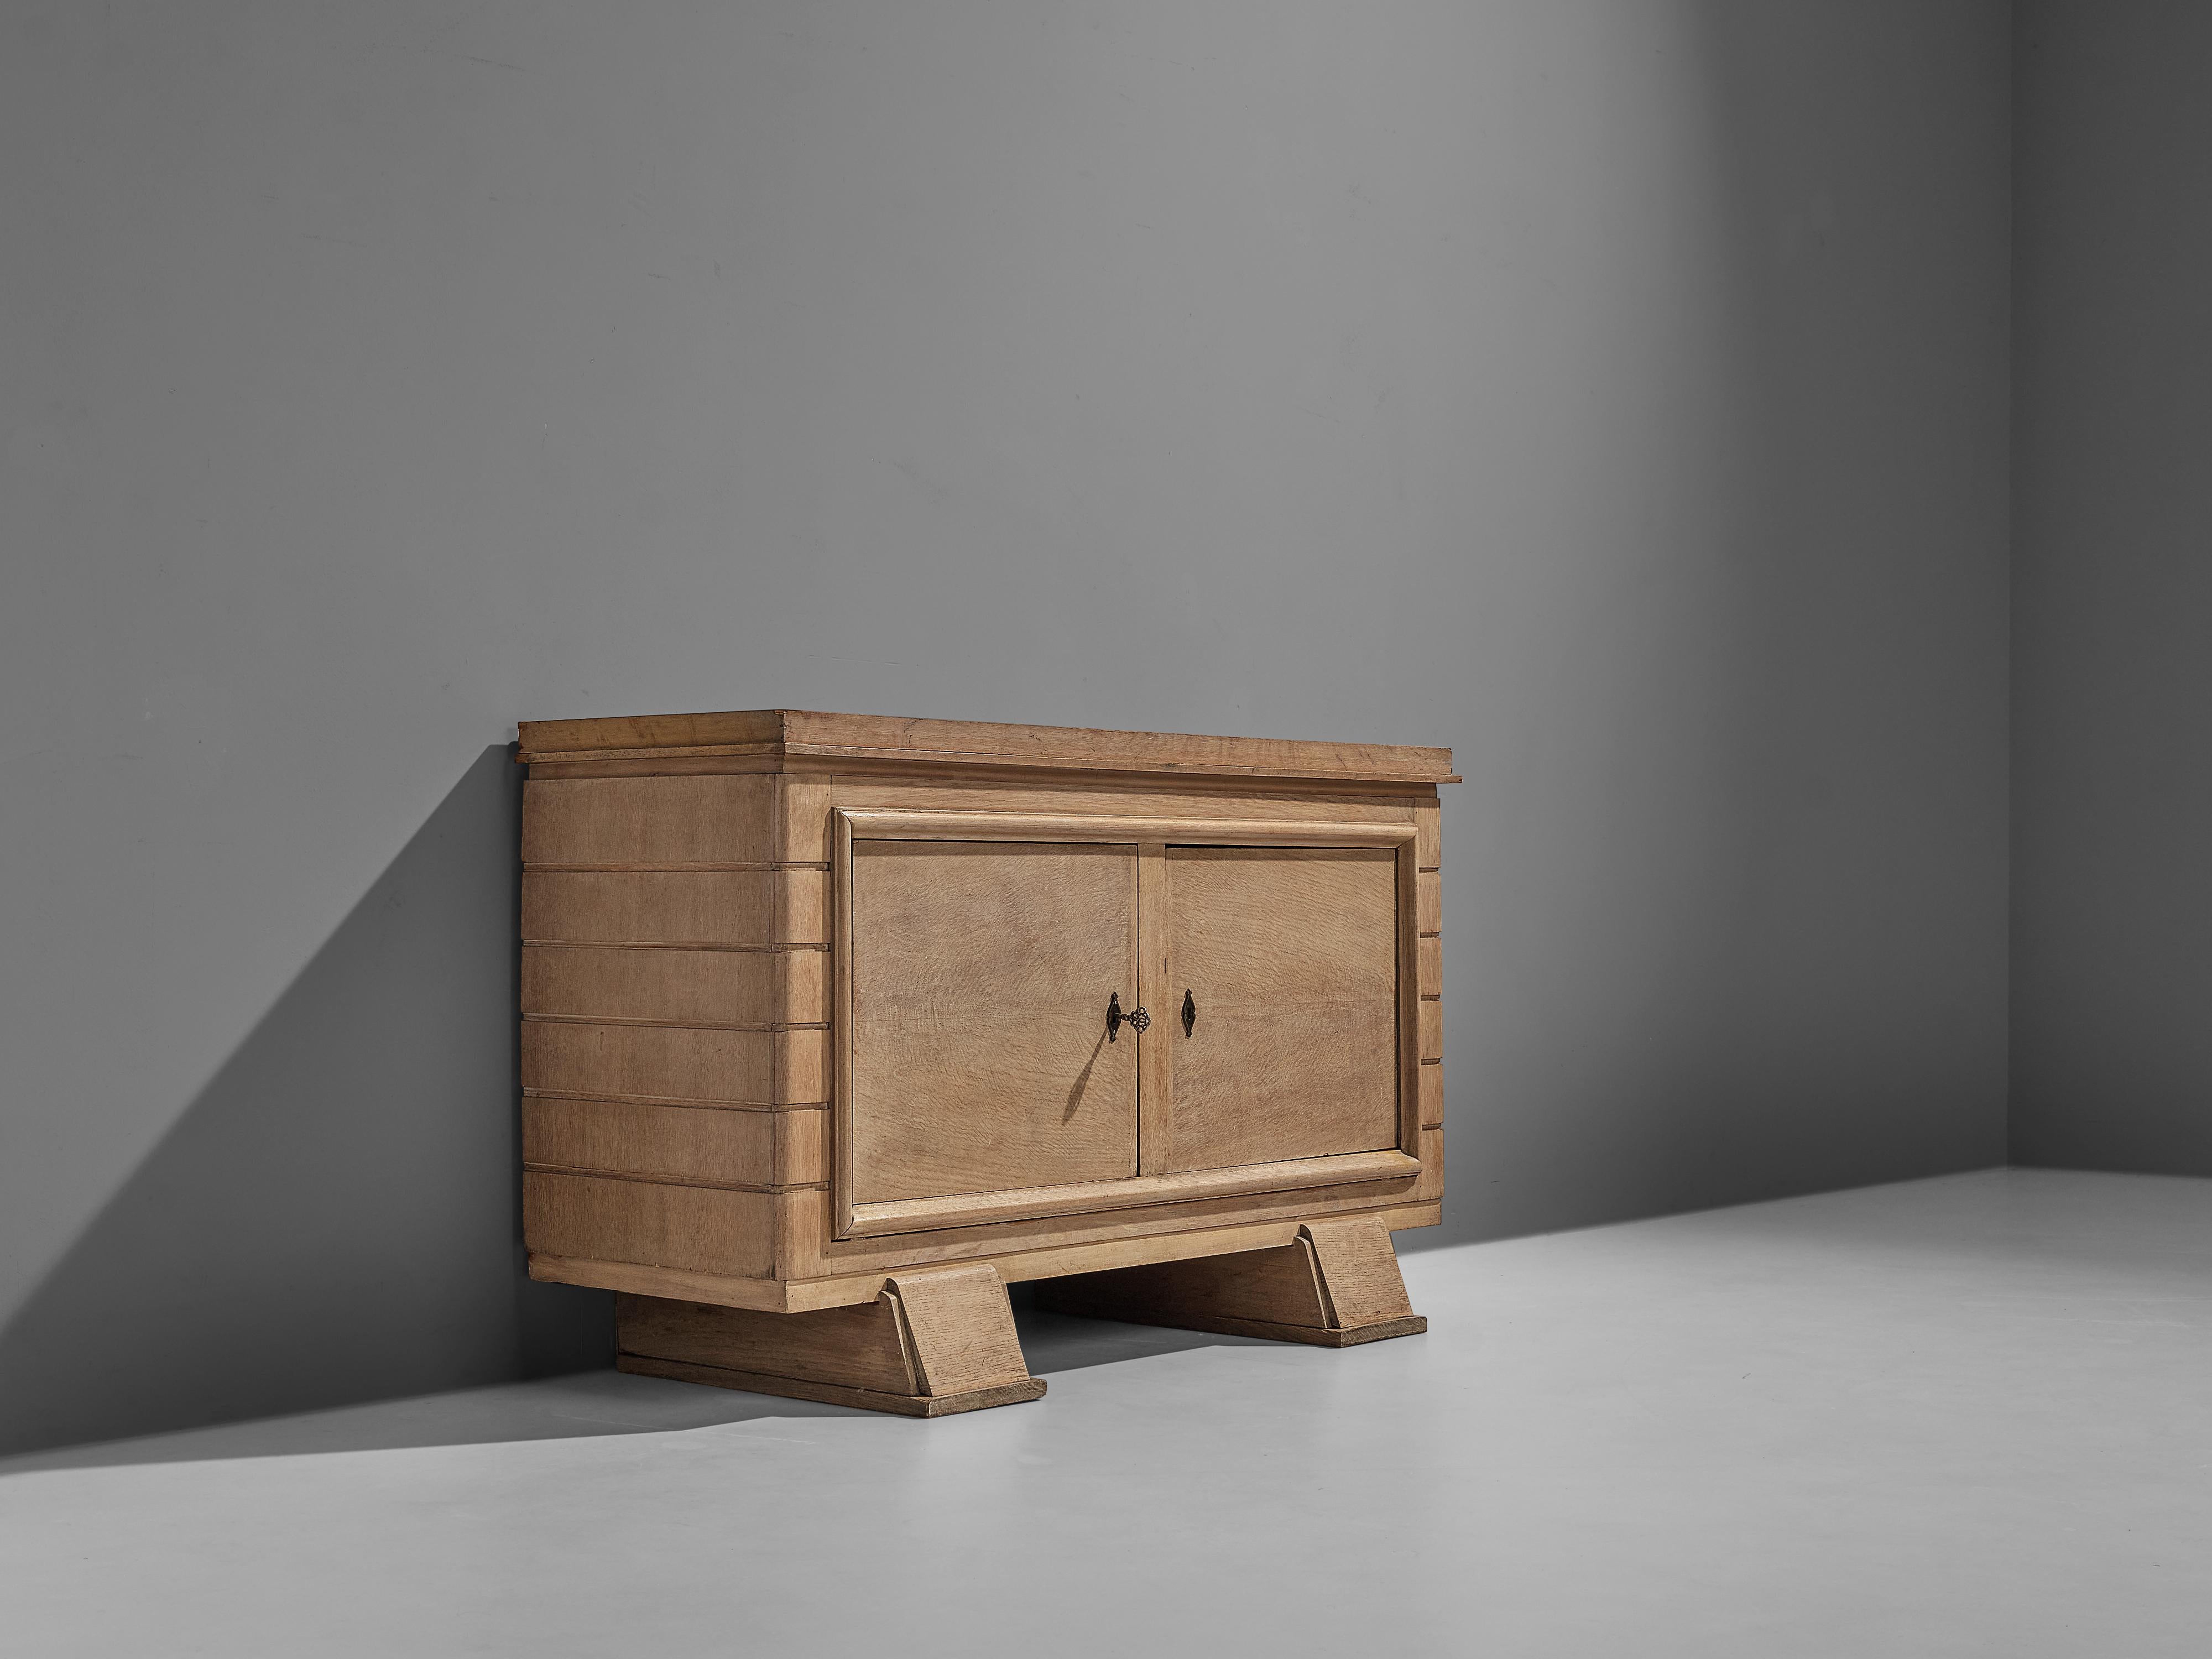 Sideboard, oak, metal, France, 1950s

French Art Deco cabinet in cerused oak. Sturdy sideboard with two sculptural tapered legs which add to the sturdy feeling of the credenza. The sideboard consists of by two doors. The sides of the cabinet are